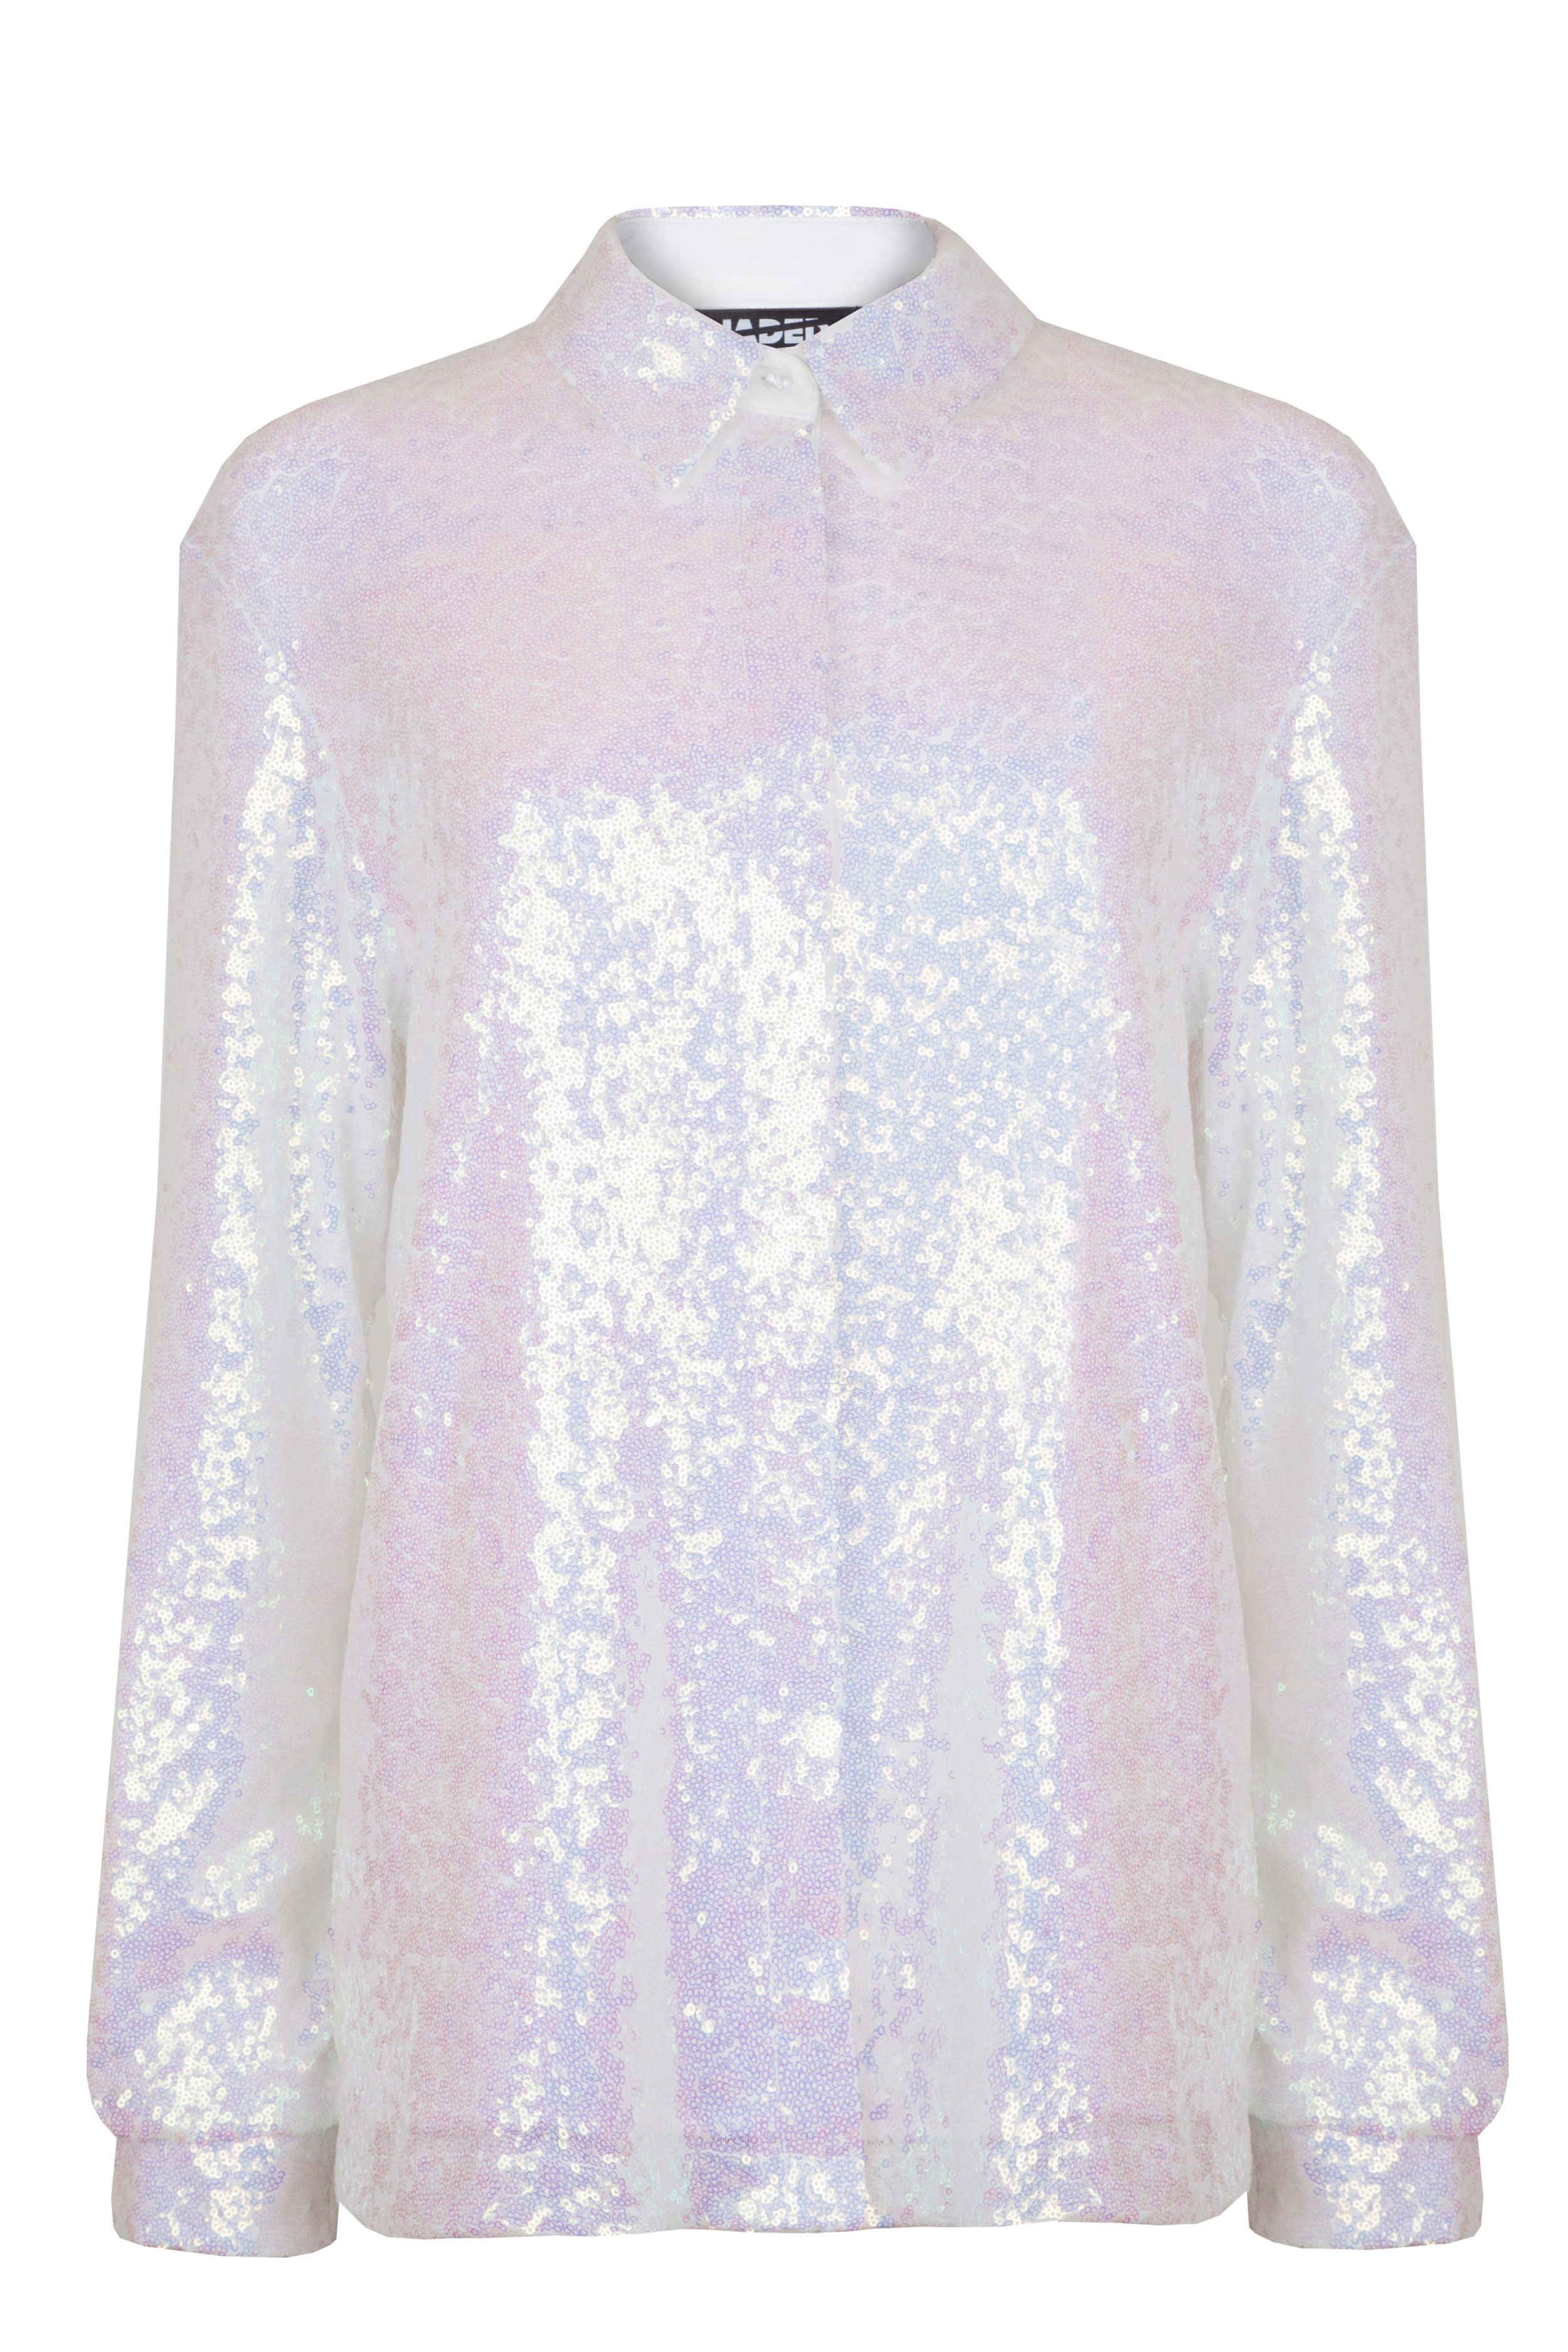 Jaded london Iridescent Sequin Shirt in White | Lyst